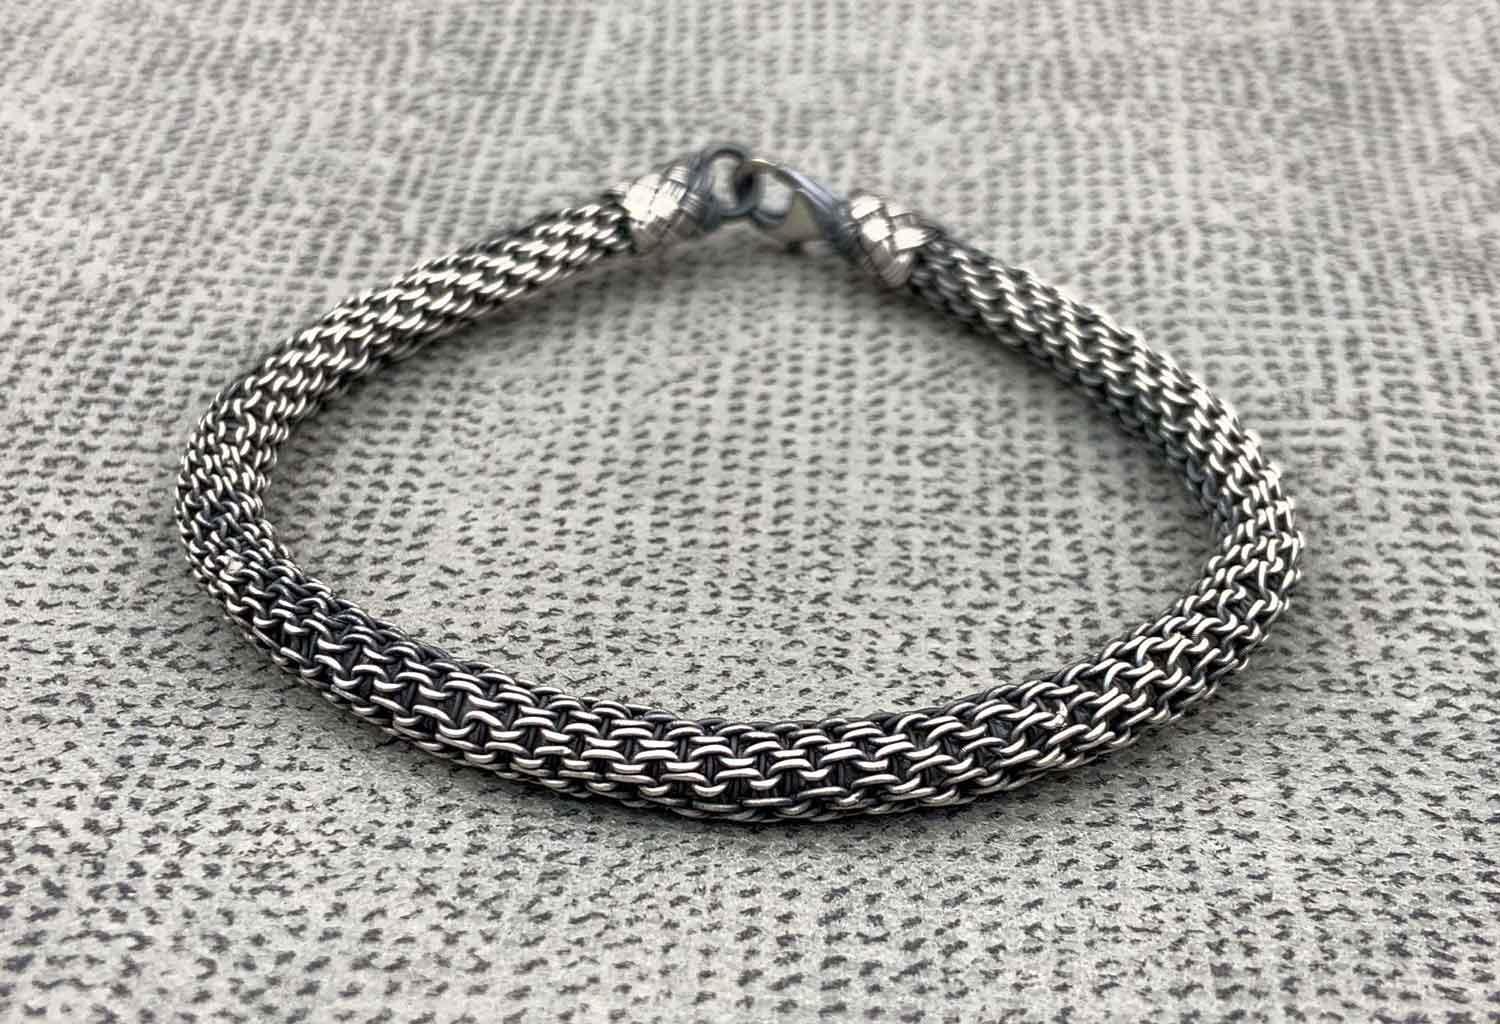 High-Quality GIFT For Grandpa, Weaved Bracelet, Weave Bracelet, Handmade Bracelet, Unisex Bracelet, Gift for Father, Sterling Silver Chain Bracelet available at Moyoni Design